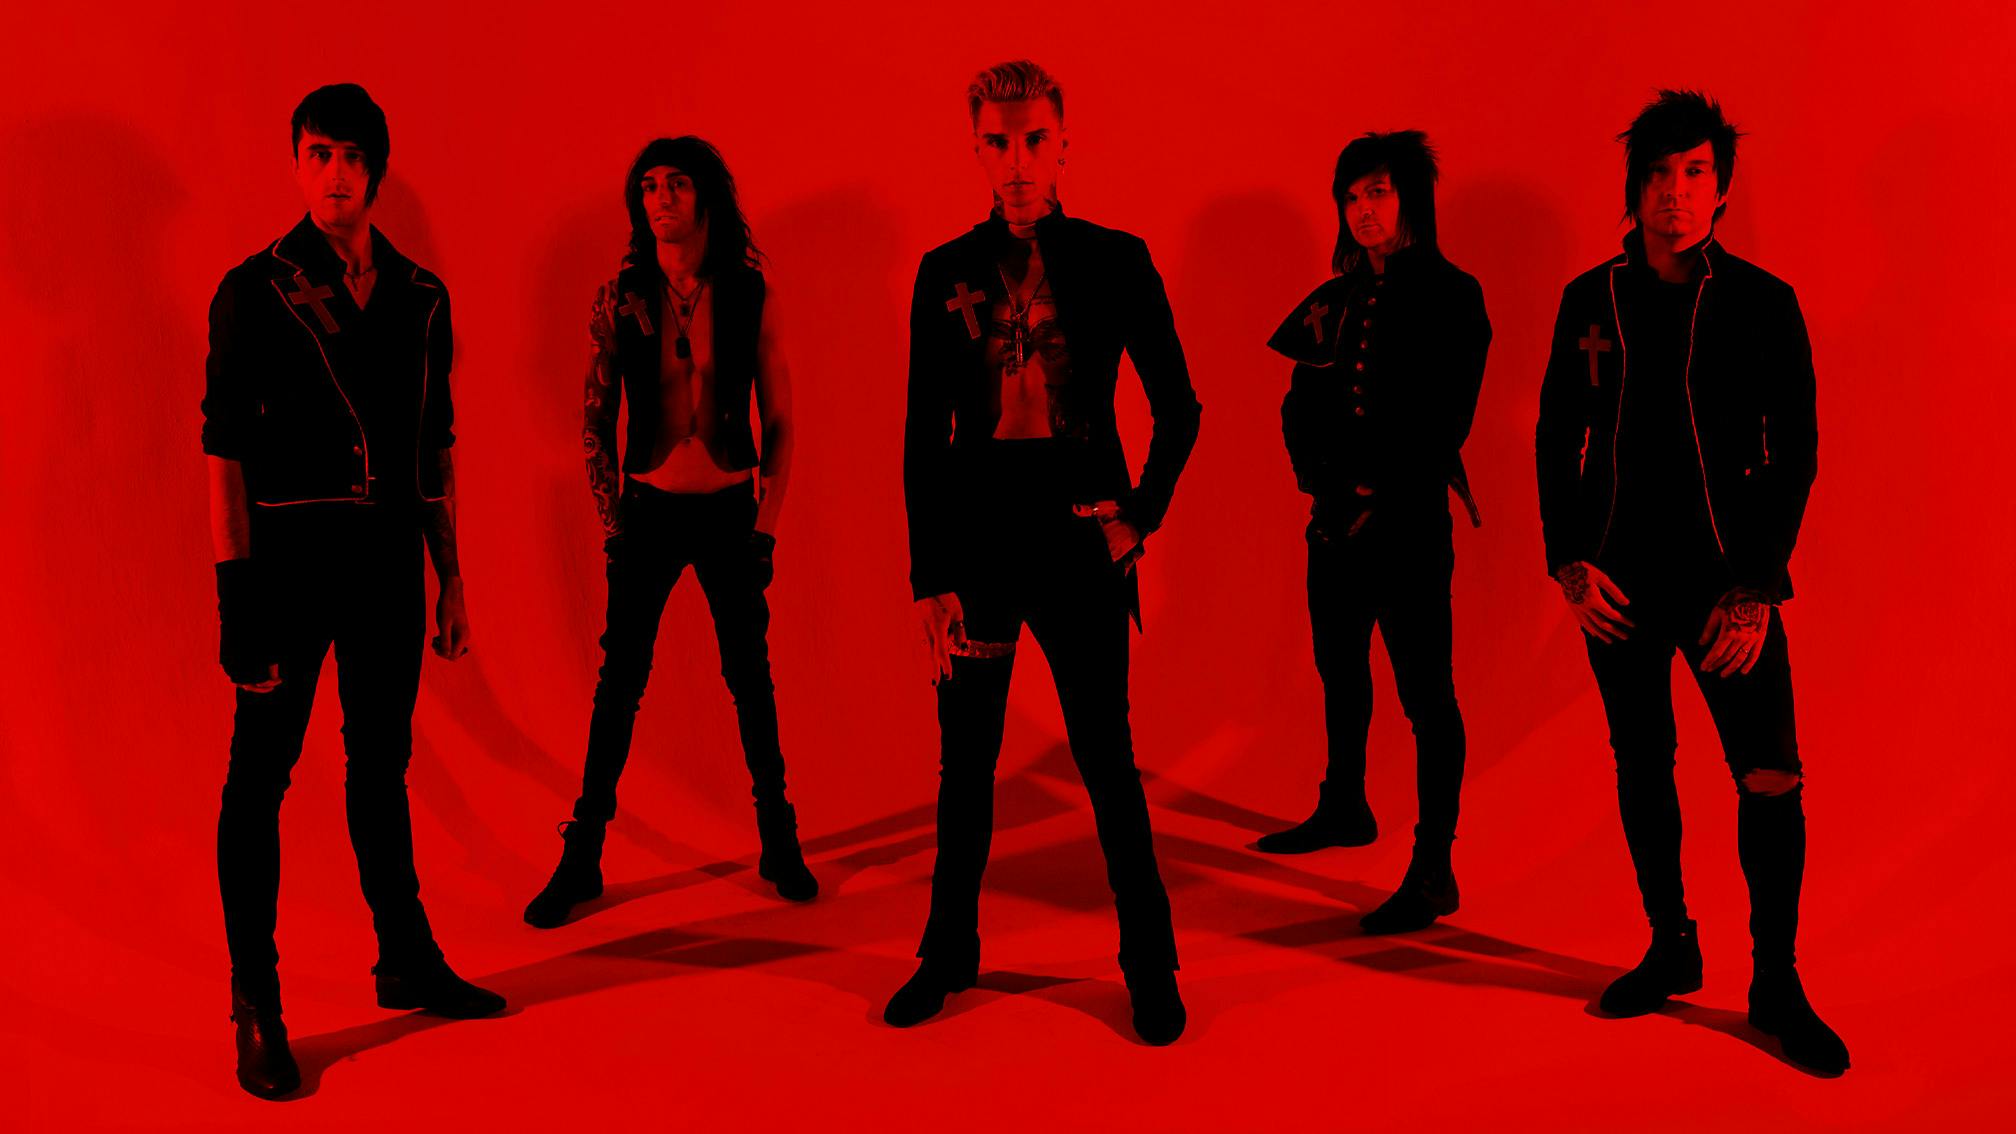 Andy Biersack On BVB's New Album: "The Goal Is To Write A Heavy Rock Record And Build Out Everything From There"